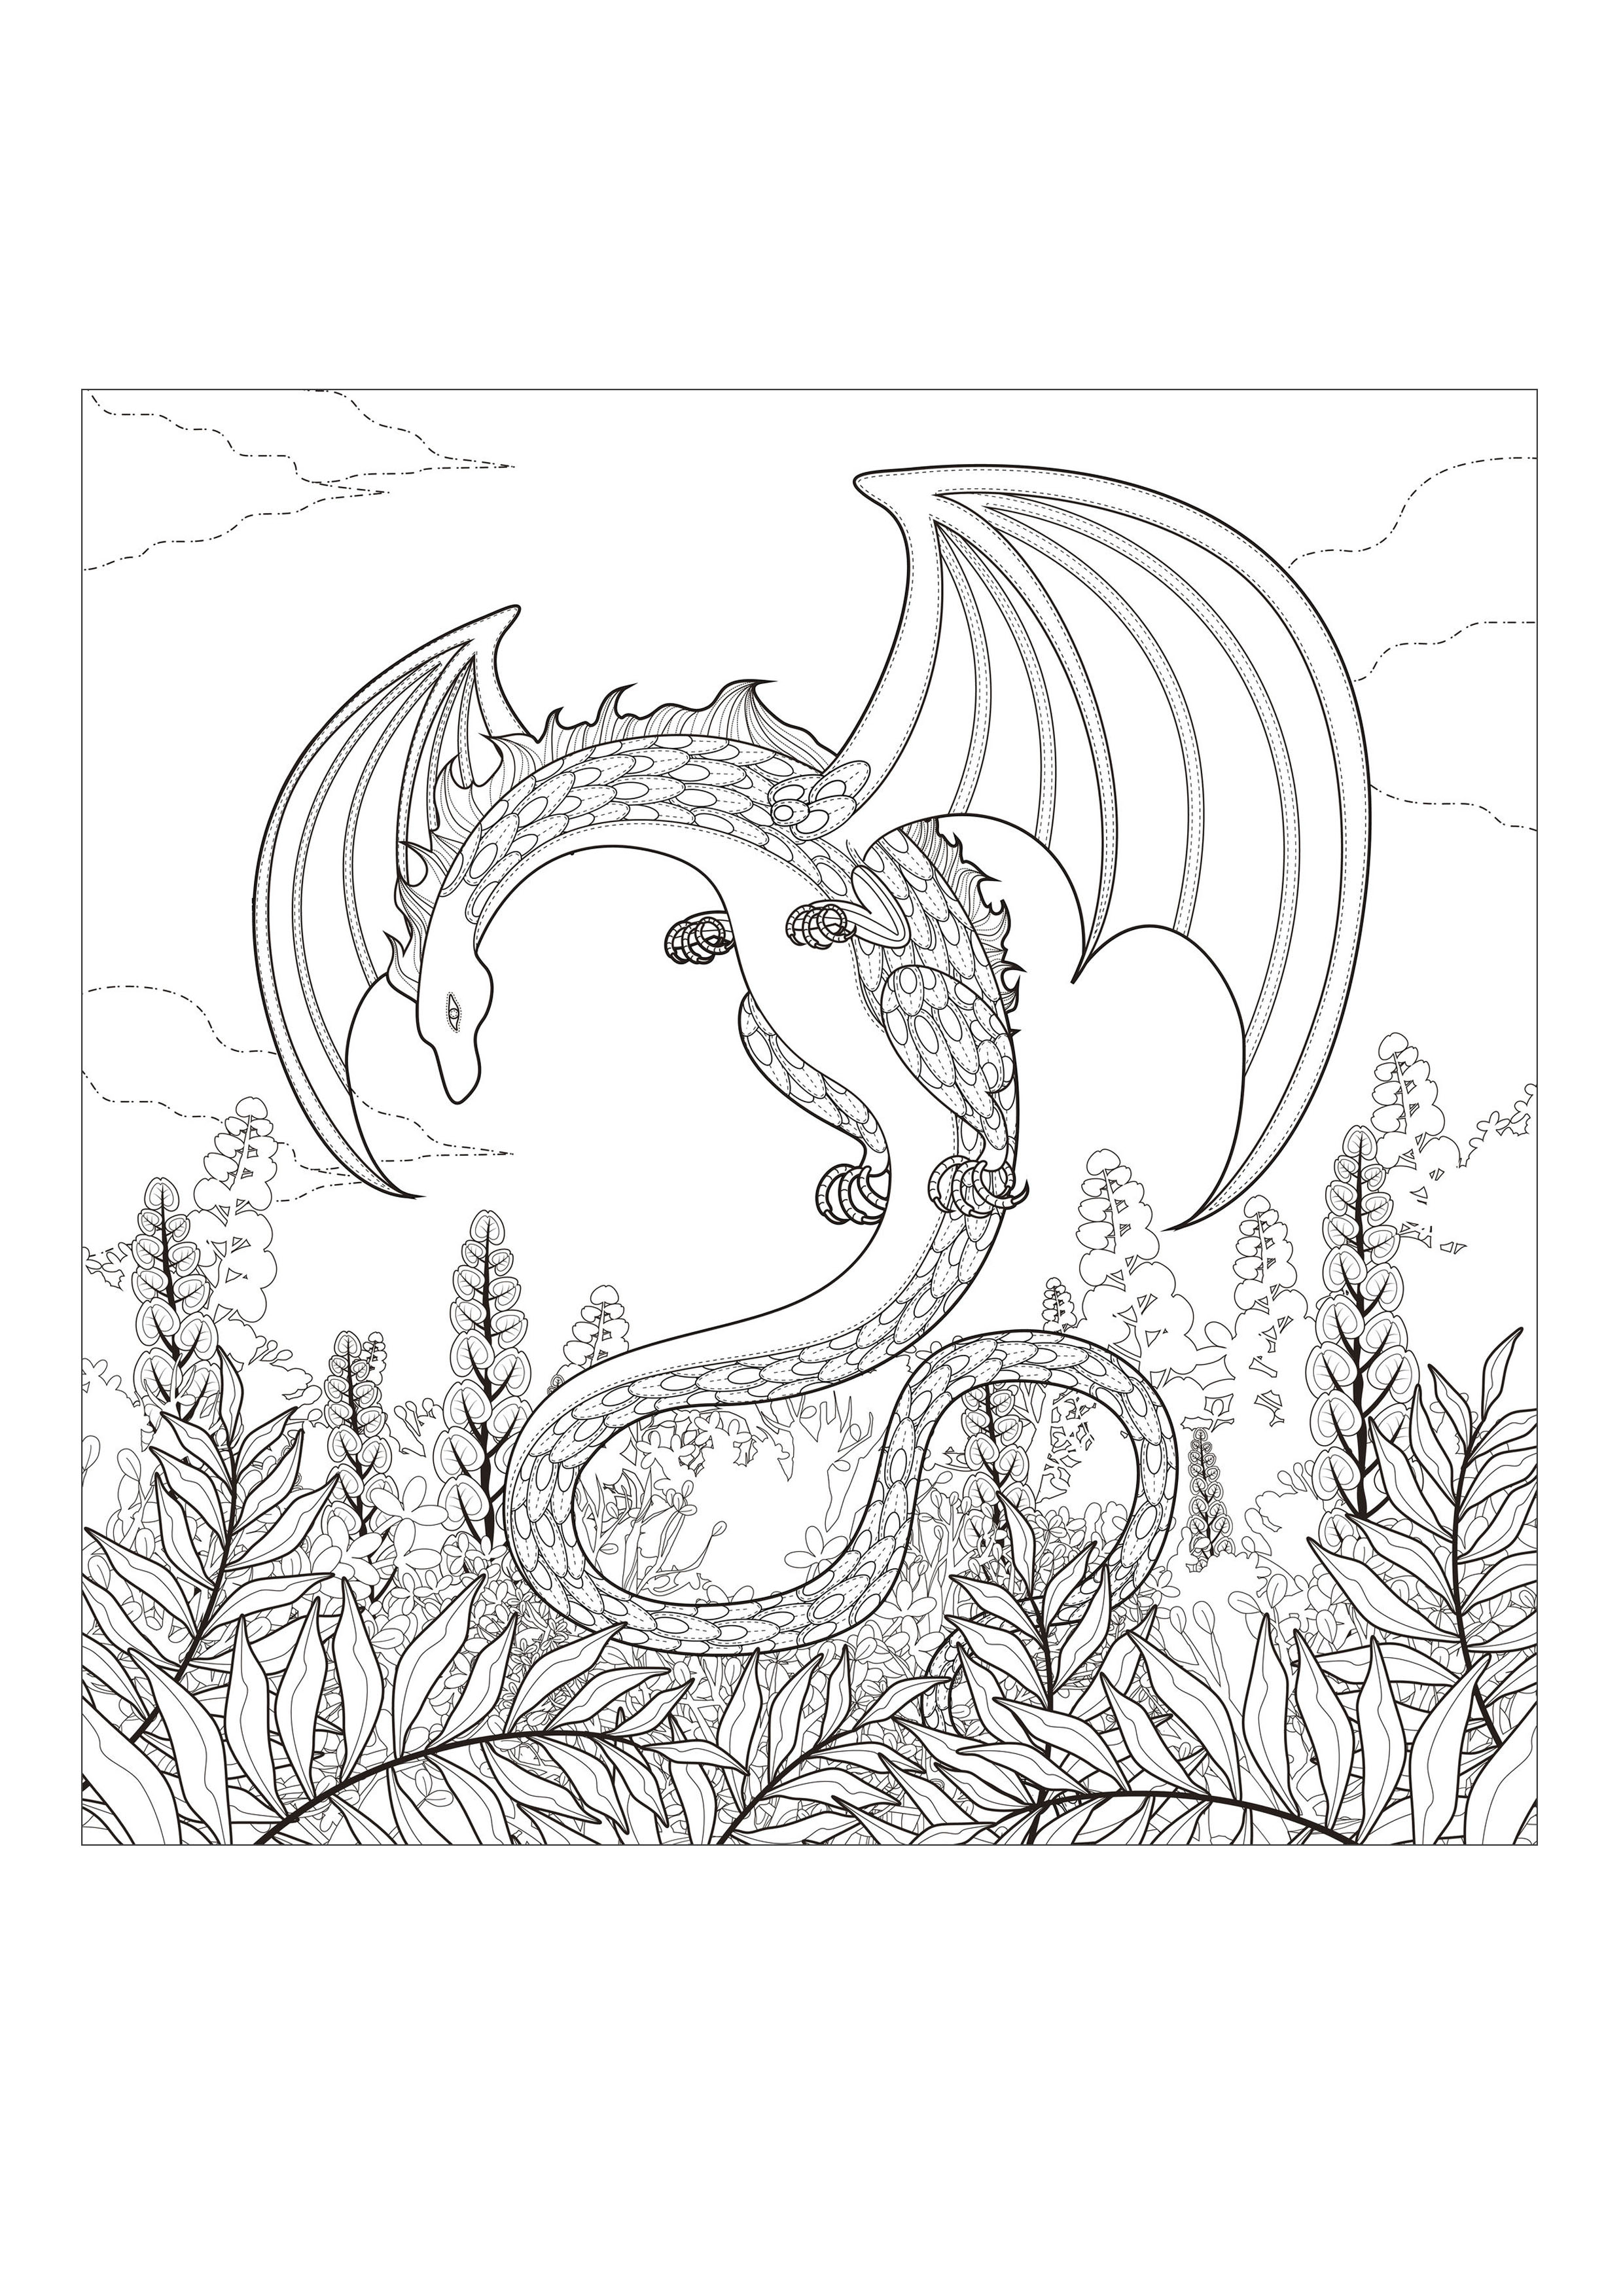 Monster dragon | New Coloring pages - Coloring pages for ...